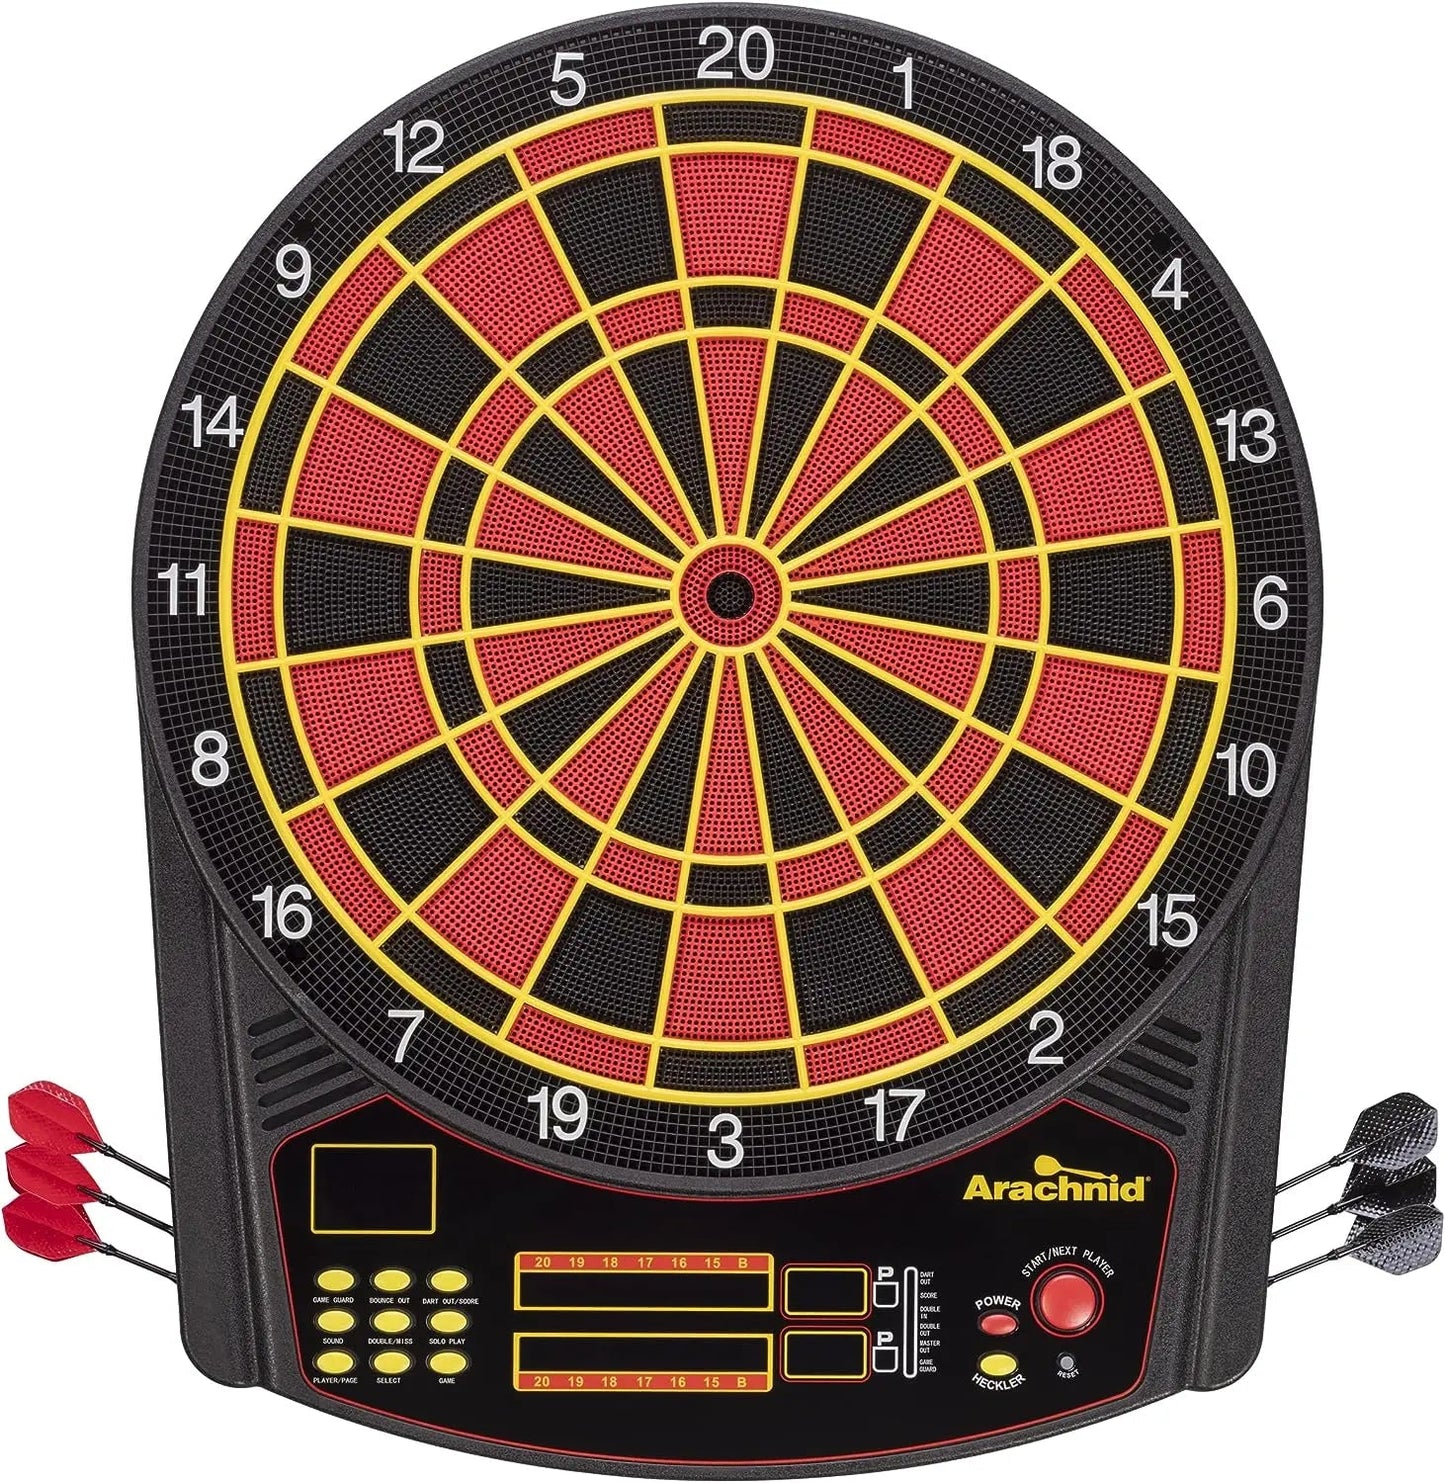 -Pro Electronic Dartboard Features 31 Games with 178 Variations and Includes Two Sets of Soft Tip Darts - Outdoor Style Company